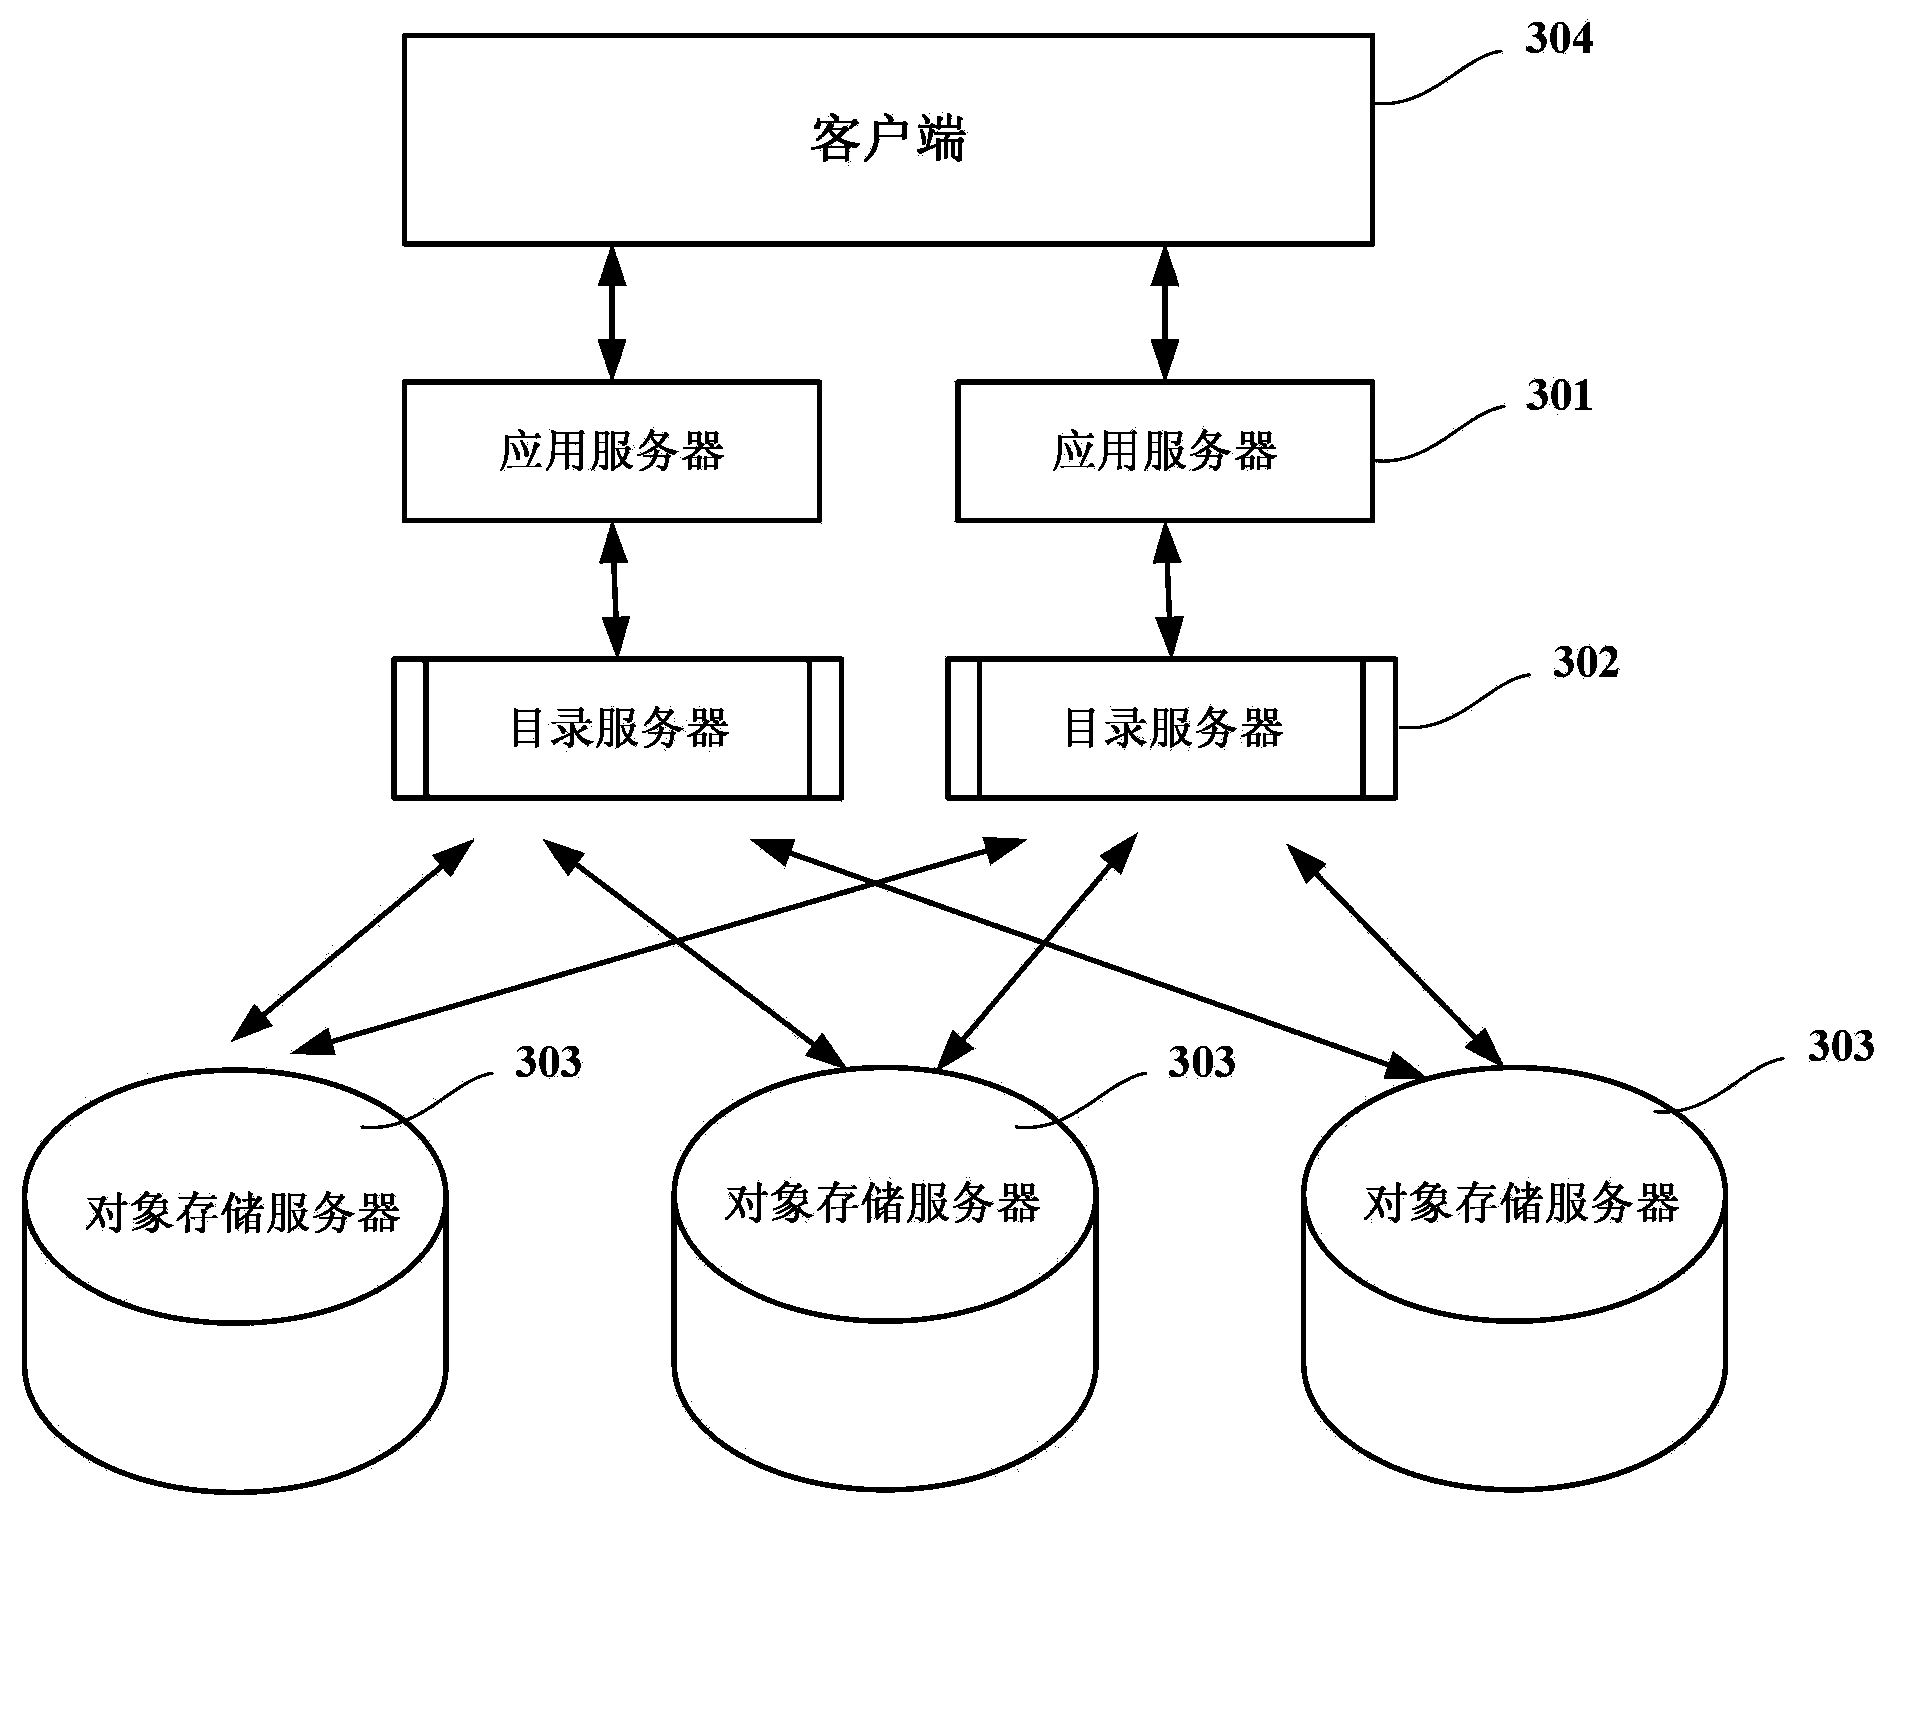 Distributed object processing method and system